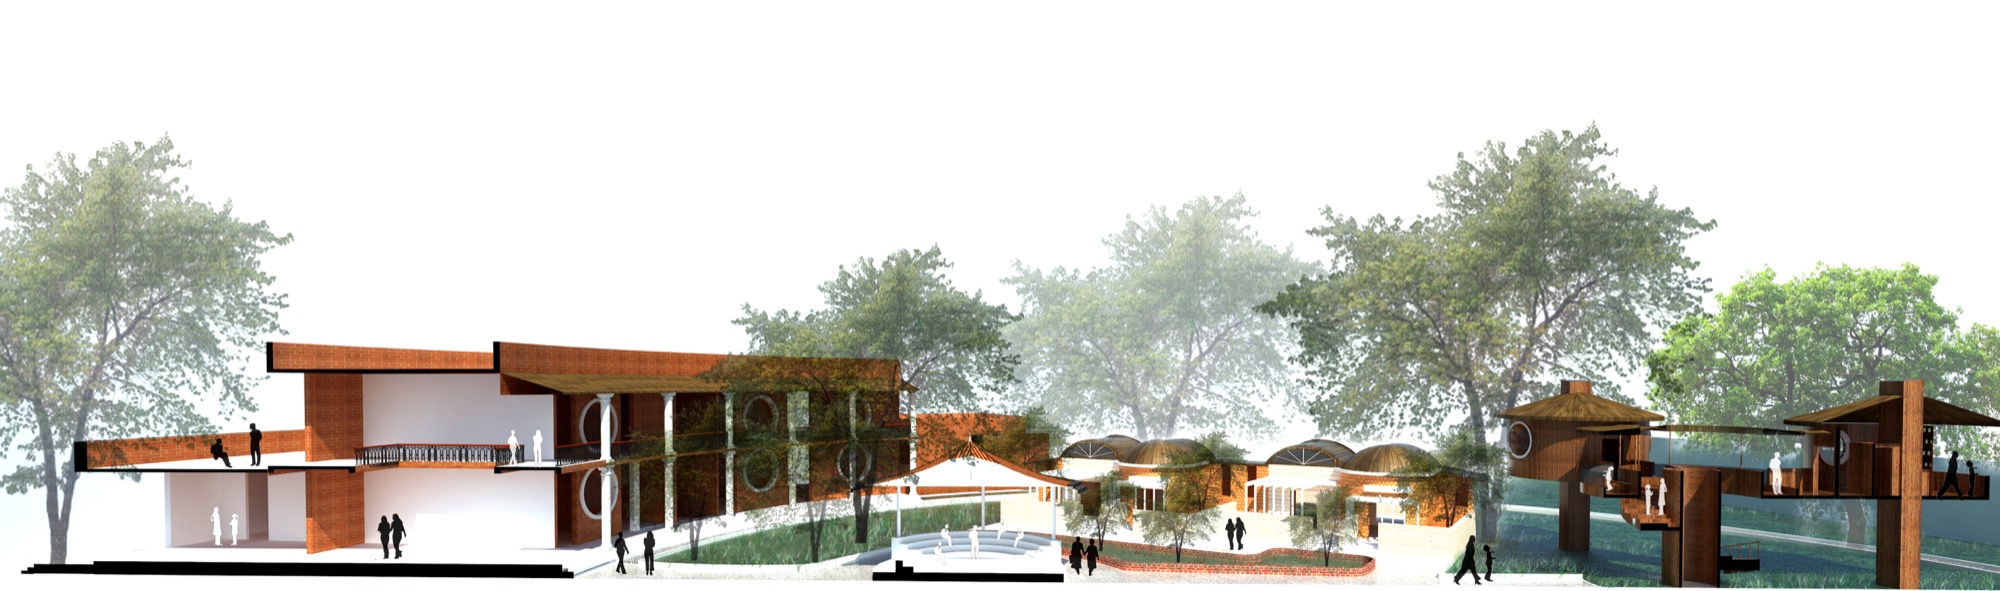 B.Arch Thesis: One Stop Crisis Centre at Pune, by Mehzabeen Sayyed, Allana College of Architecture 18